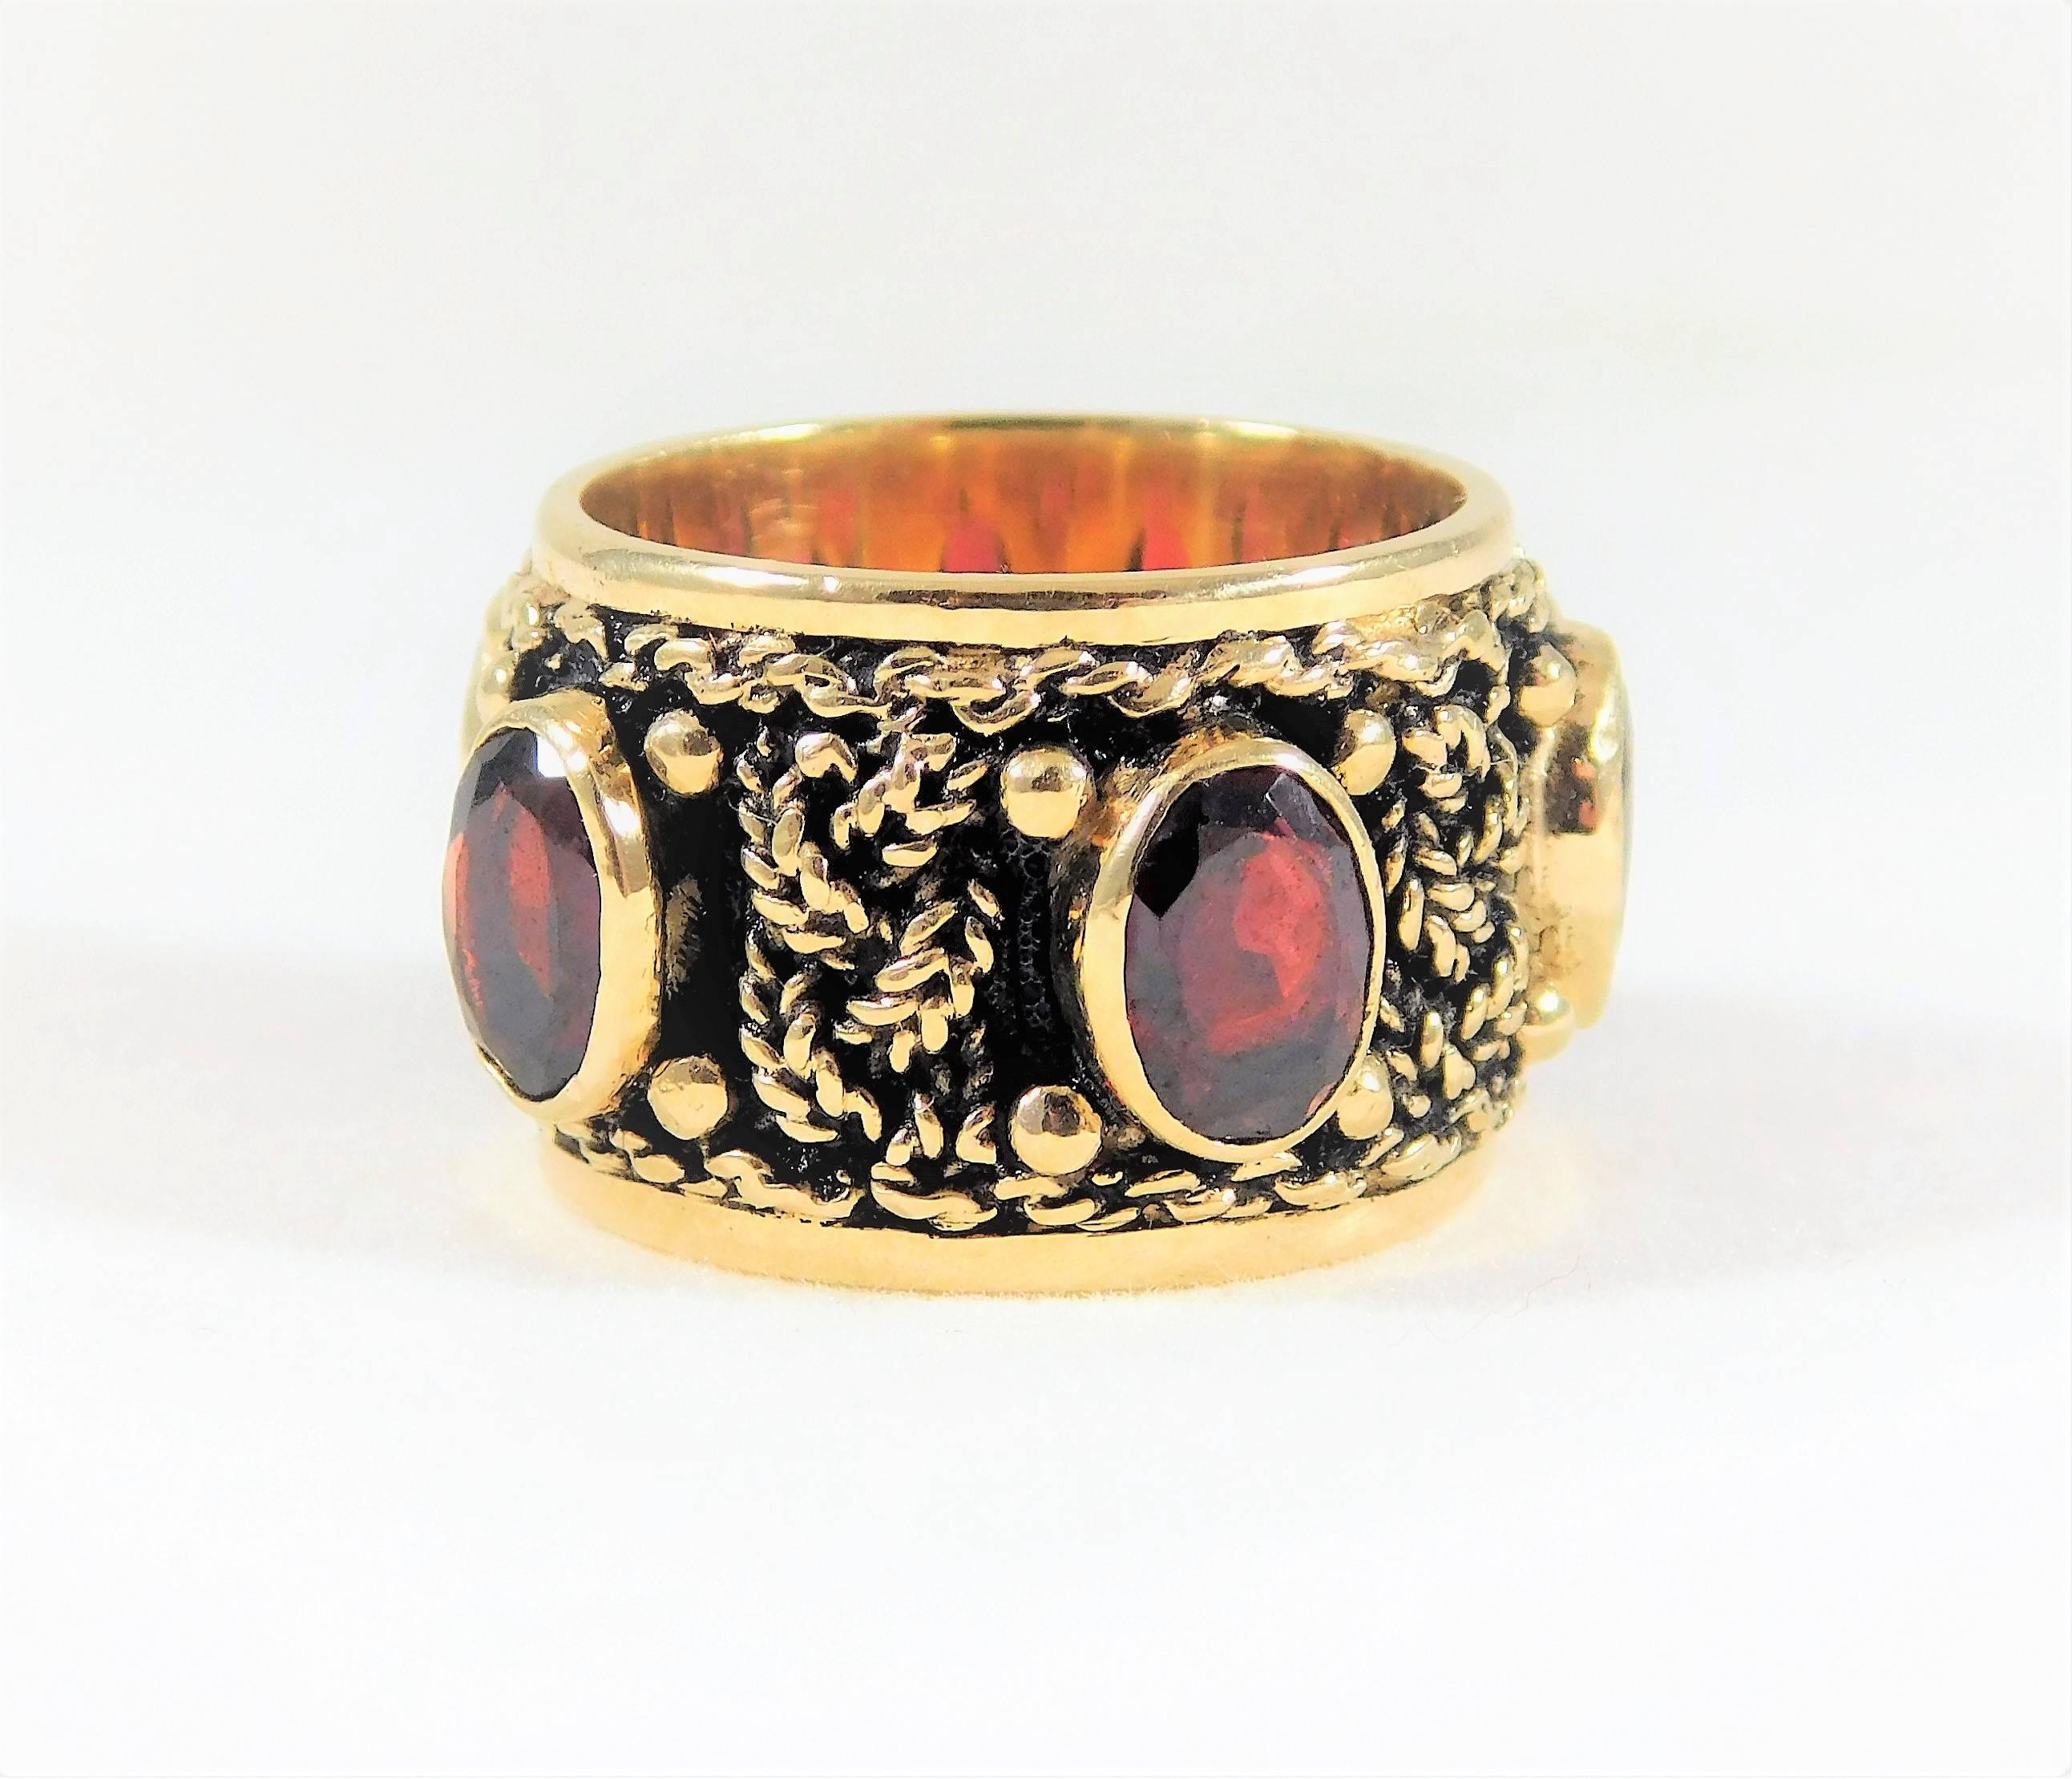 From a noble New Orleans estate.  Circa 1950.  A very unique antique piece! This elegant ring is made of solid 14k yellow gold.  It is a ½ inch wide and weighs 11.8 grams. It is masterfully jeweled with 5 beautiful oval-faceted AAA quality Rhodolite